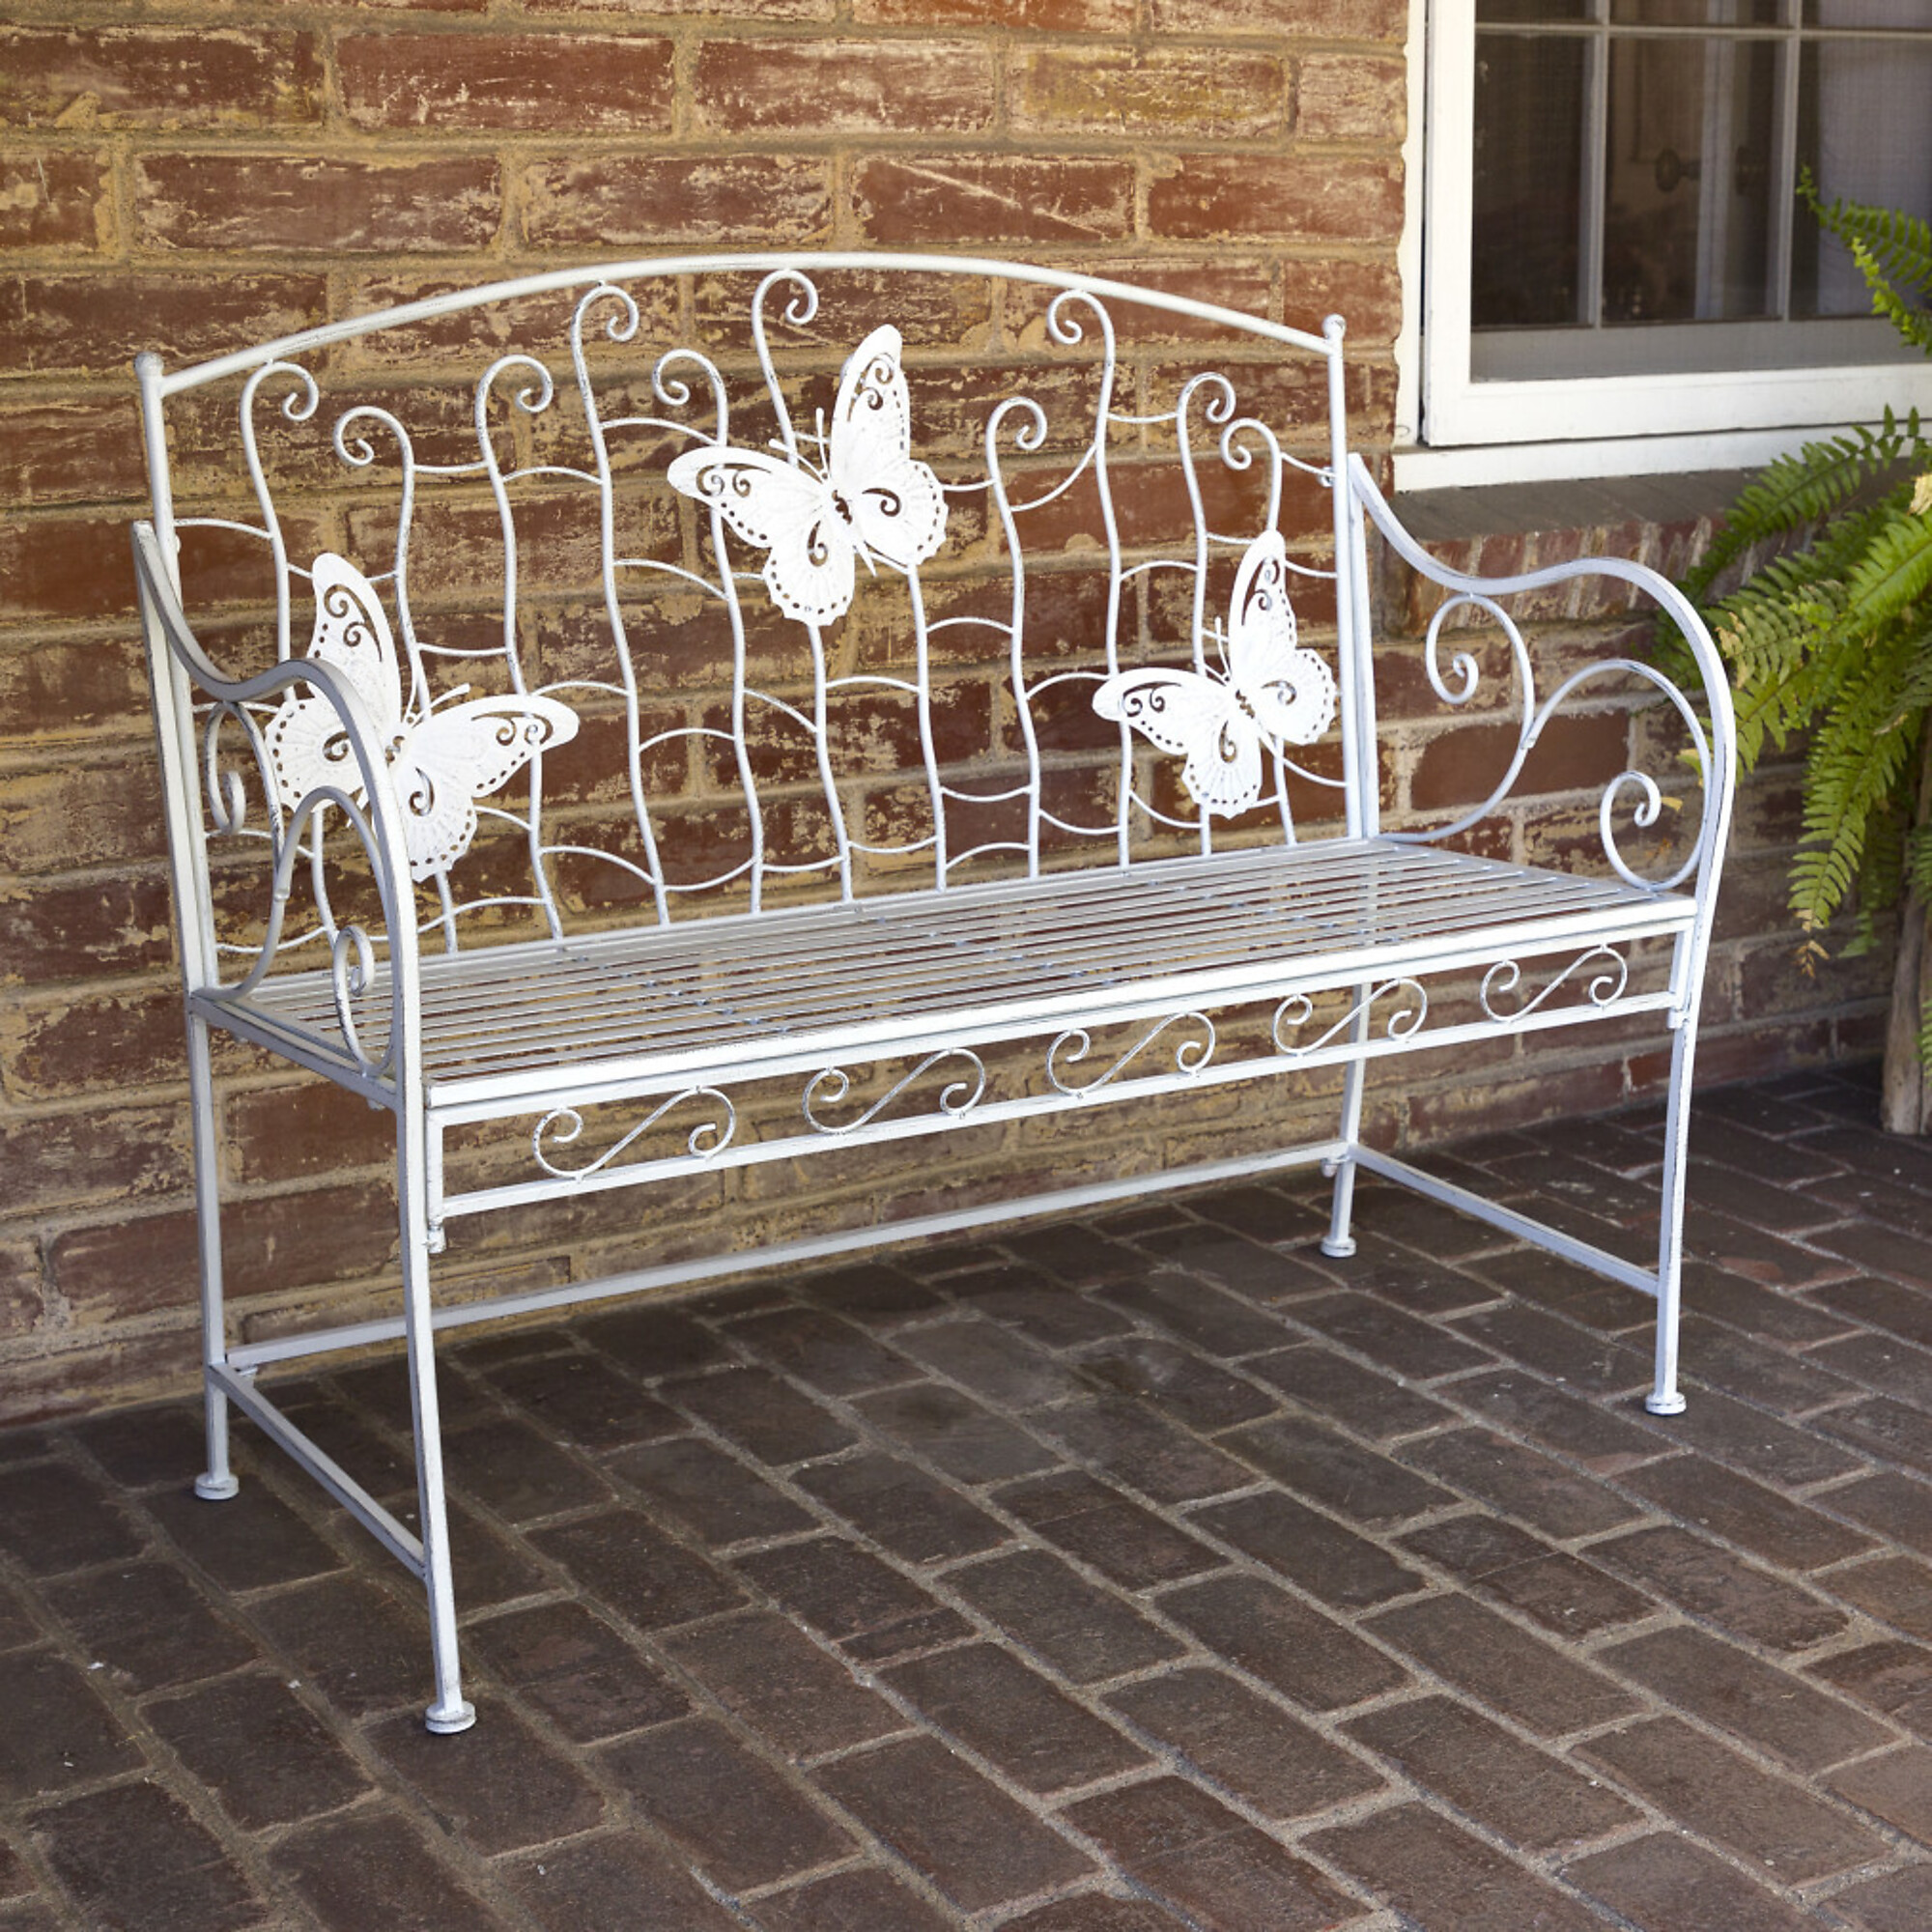 Alpine Corporation, White Metal Garden Bench with Butterfly Backrest, Primary Color White, Material Metal, Width 19 in, Model BAZ422